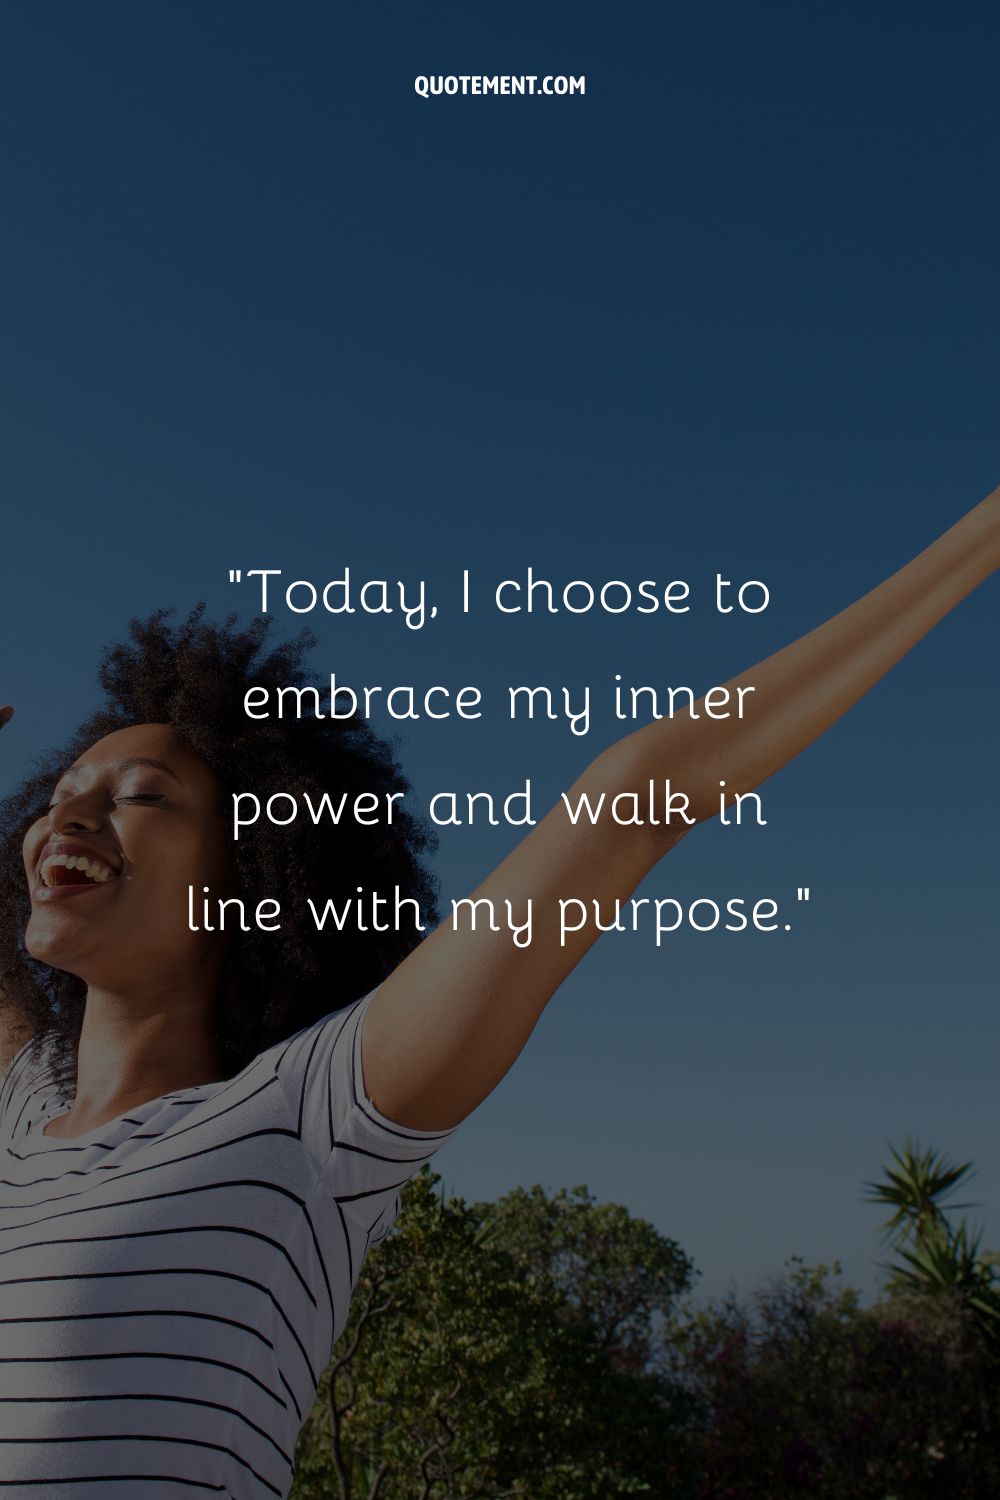 Today, I choose to embrace my inner power and walk in line with my purpose